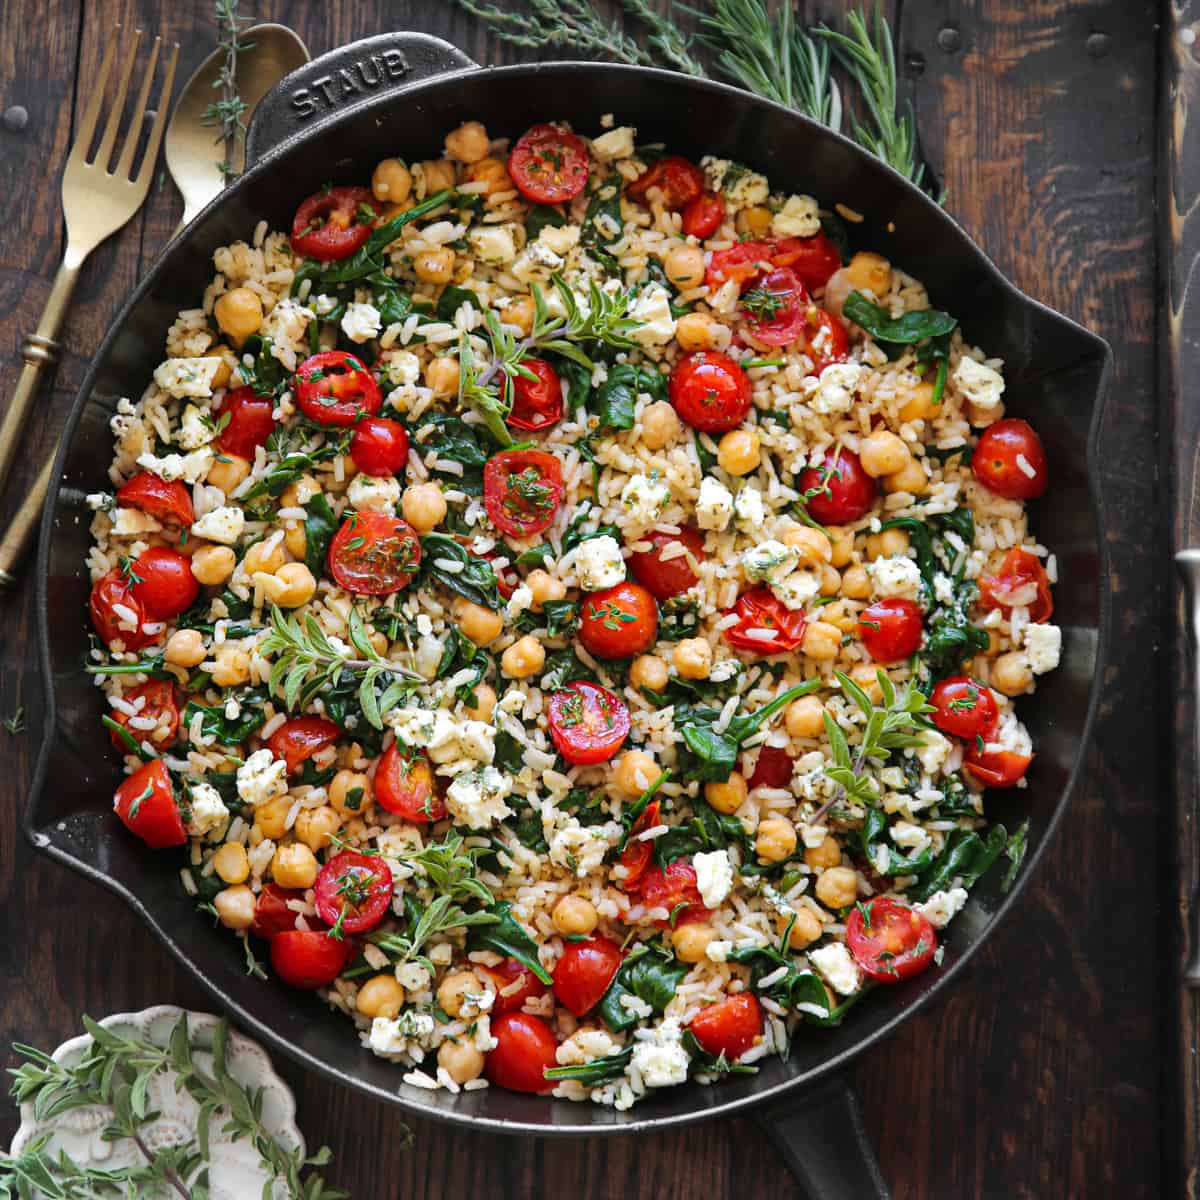 Mediterranean Lemon Rice with Chickpeas, Tomatoes, and Feta